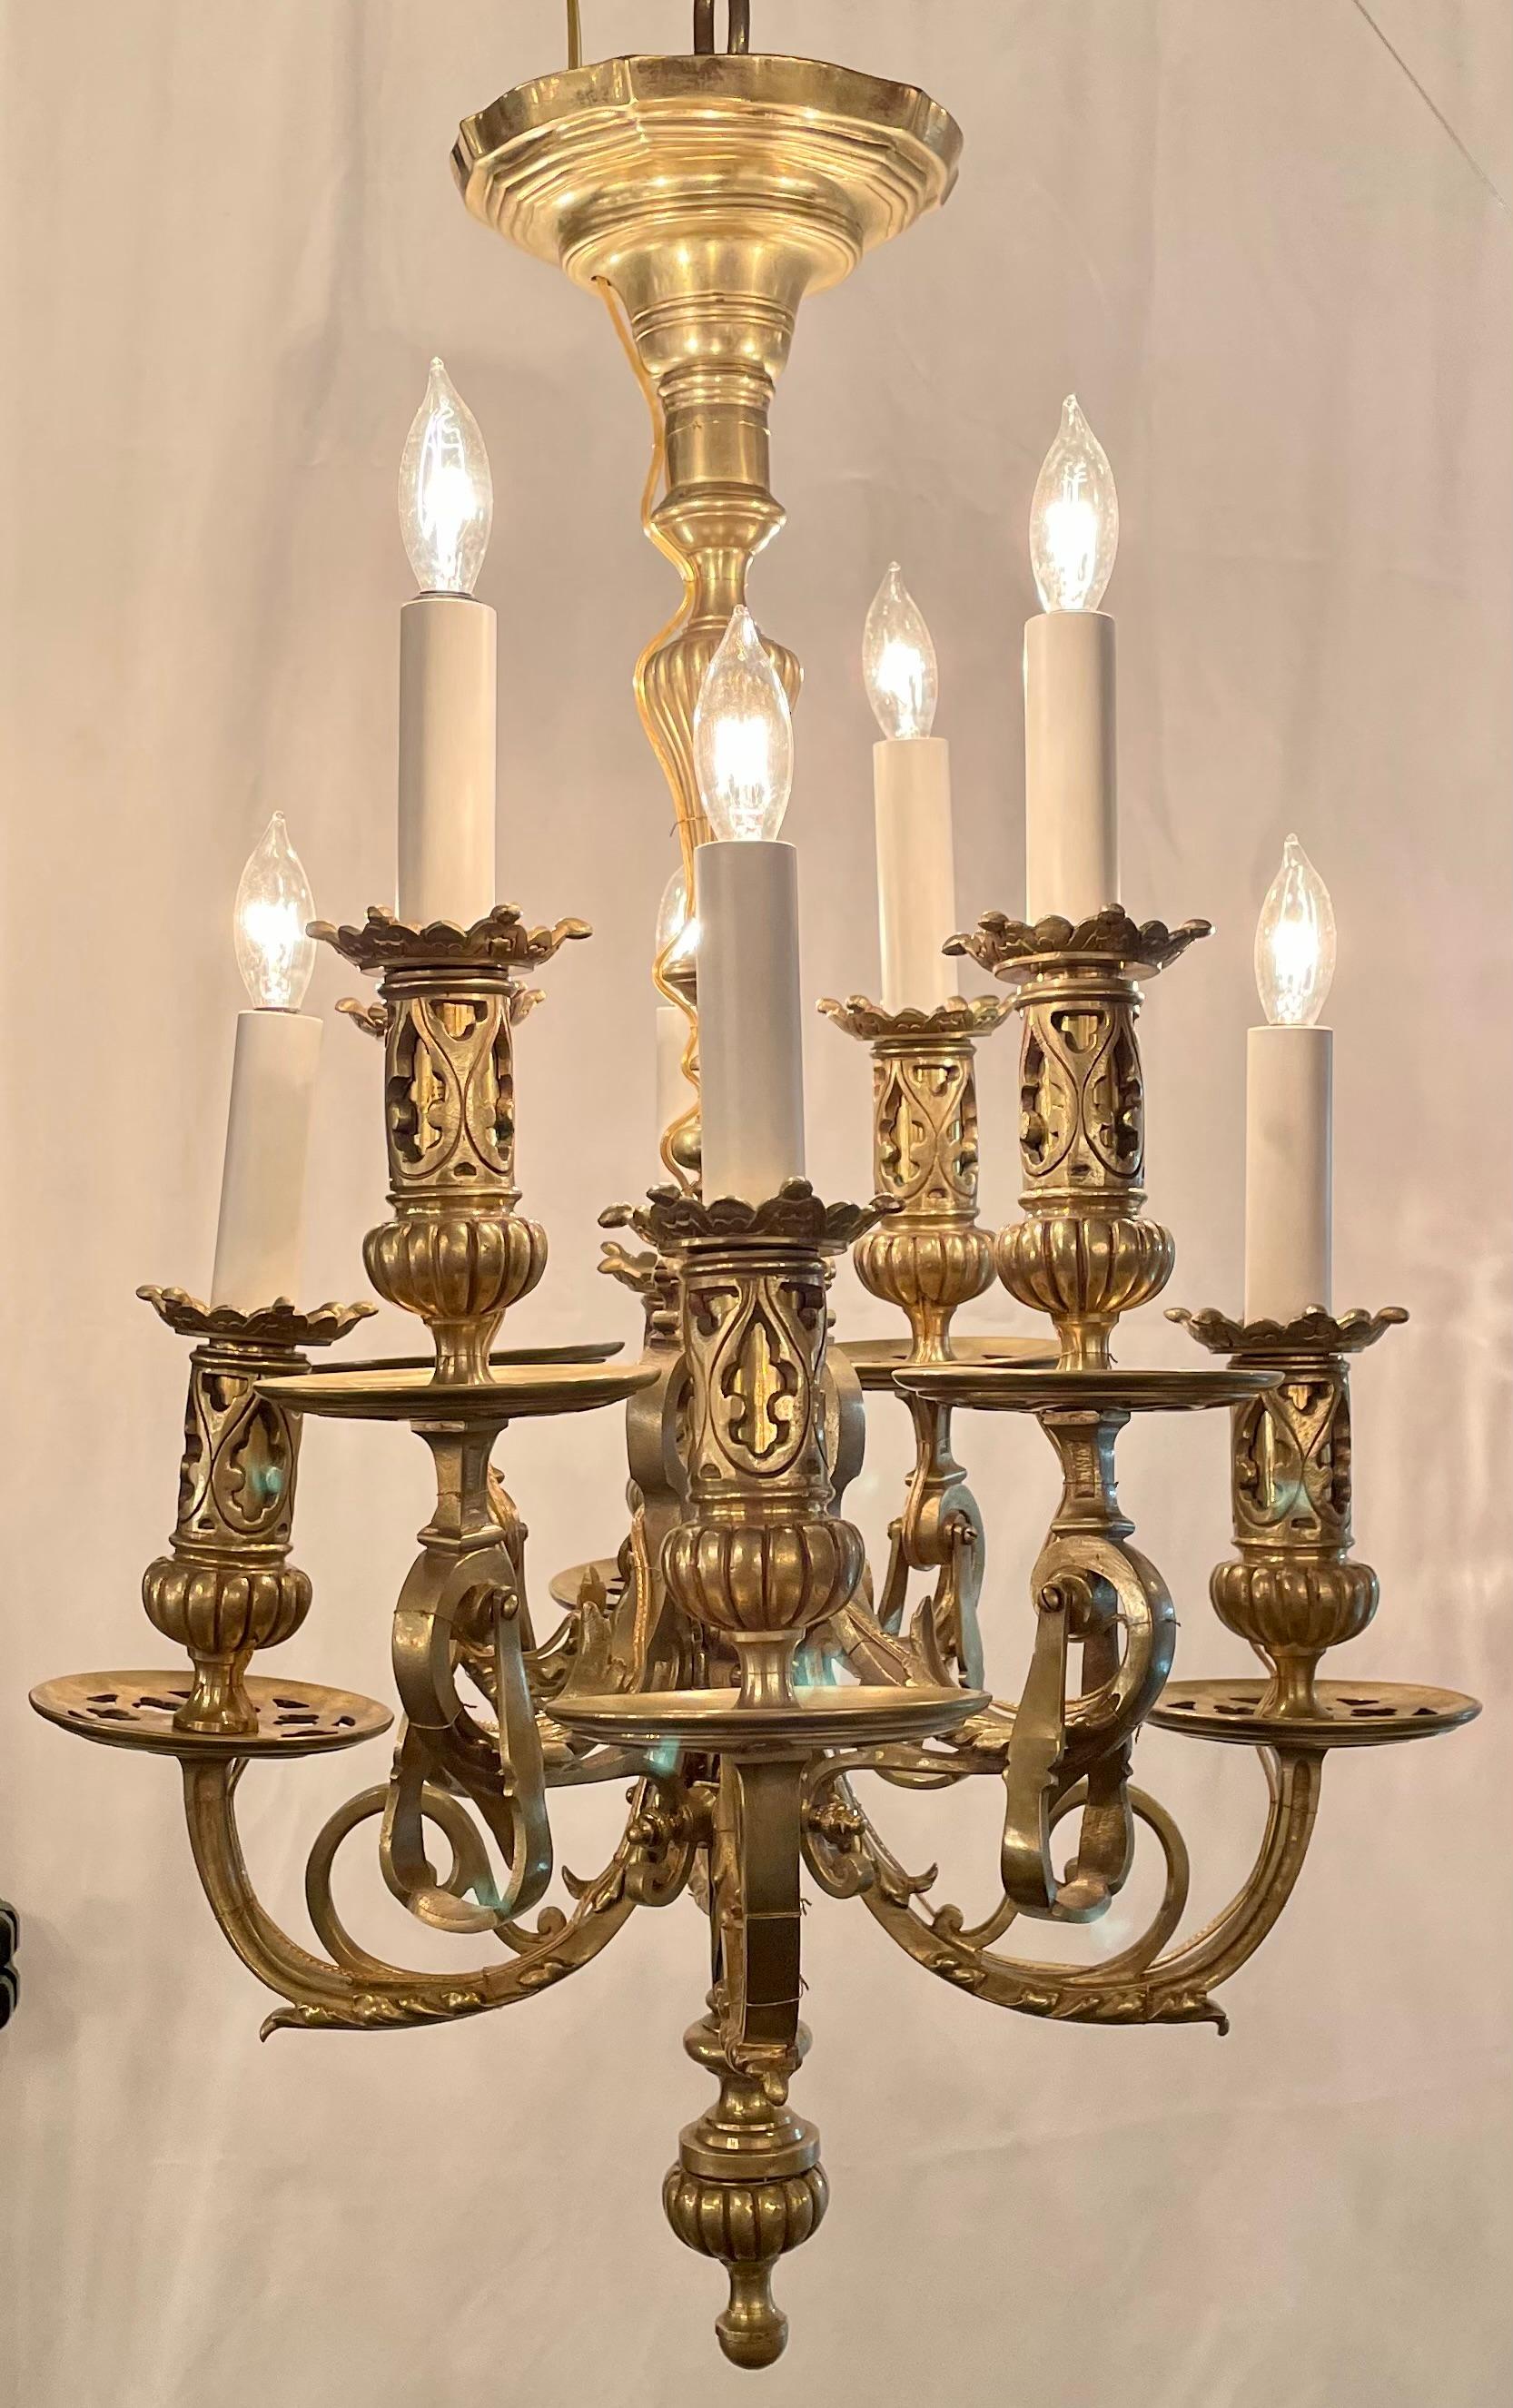 Pair small antique French Louis XIII style bronze chandeliers, circa 1860-1870.